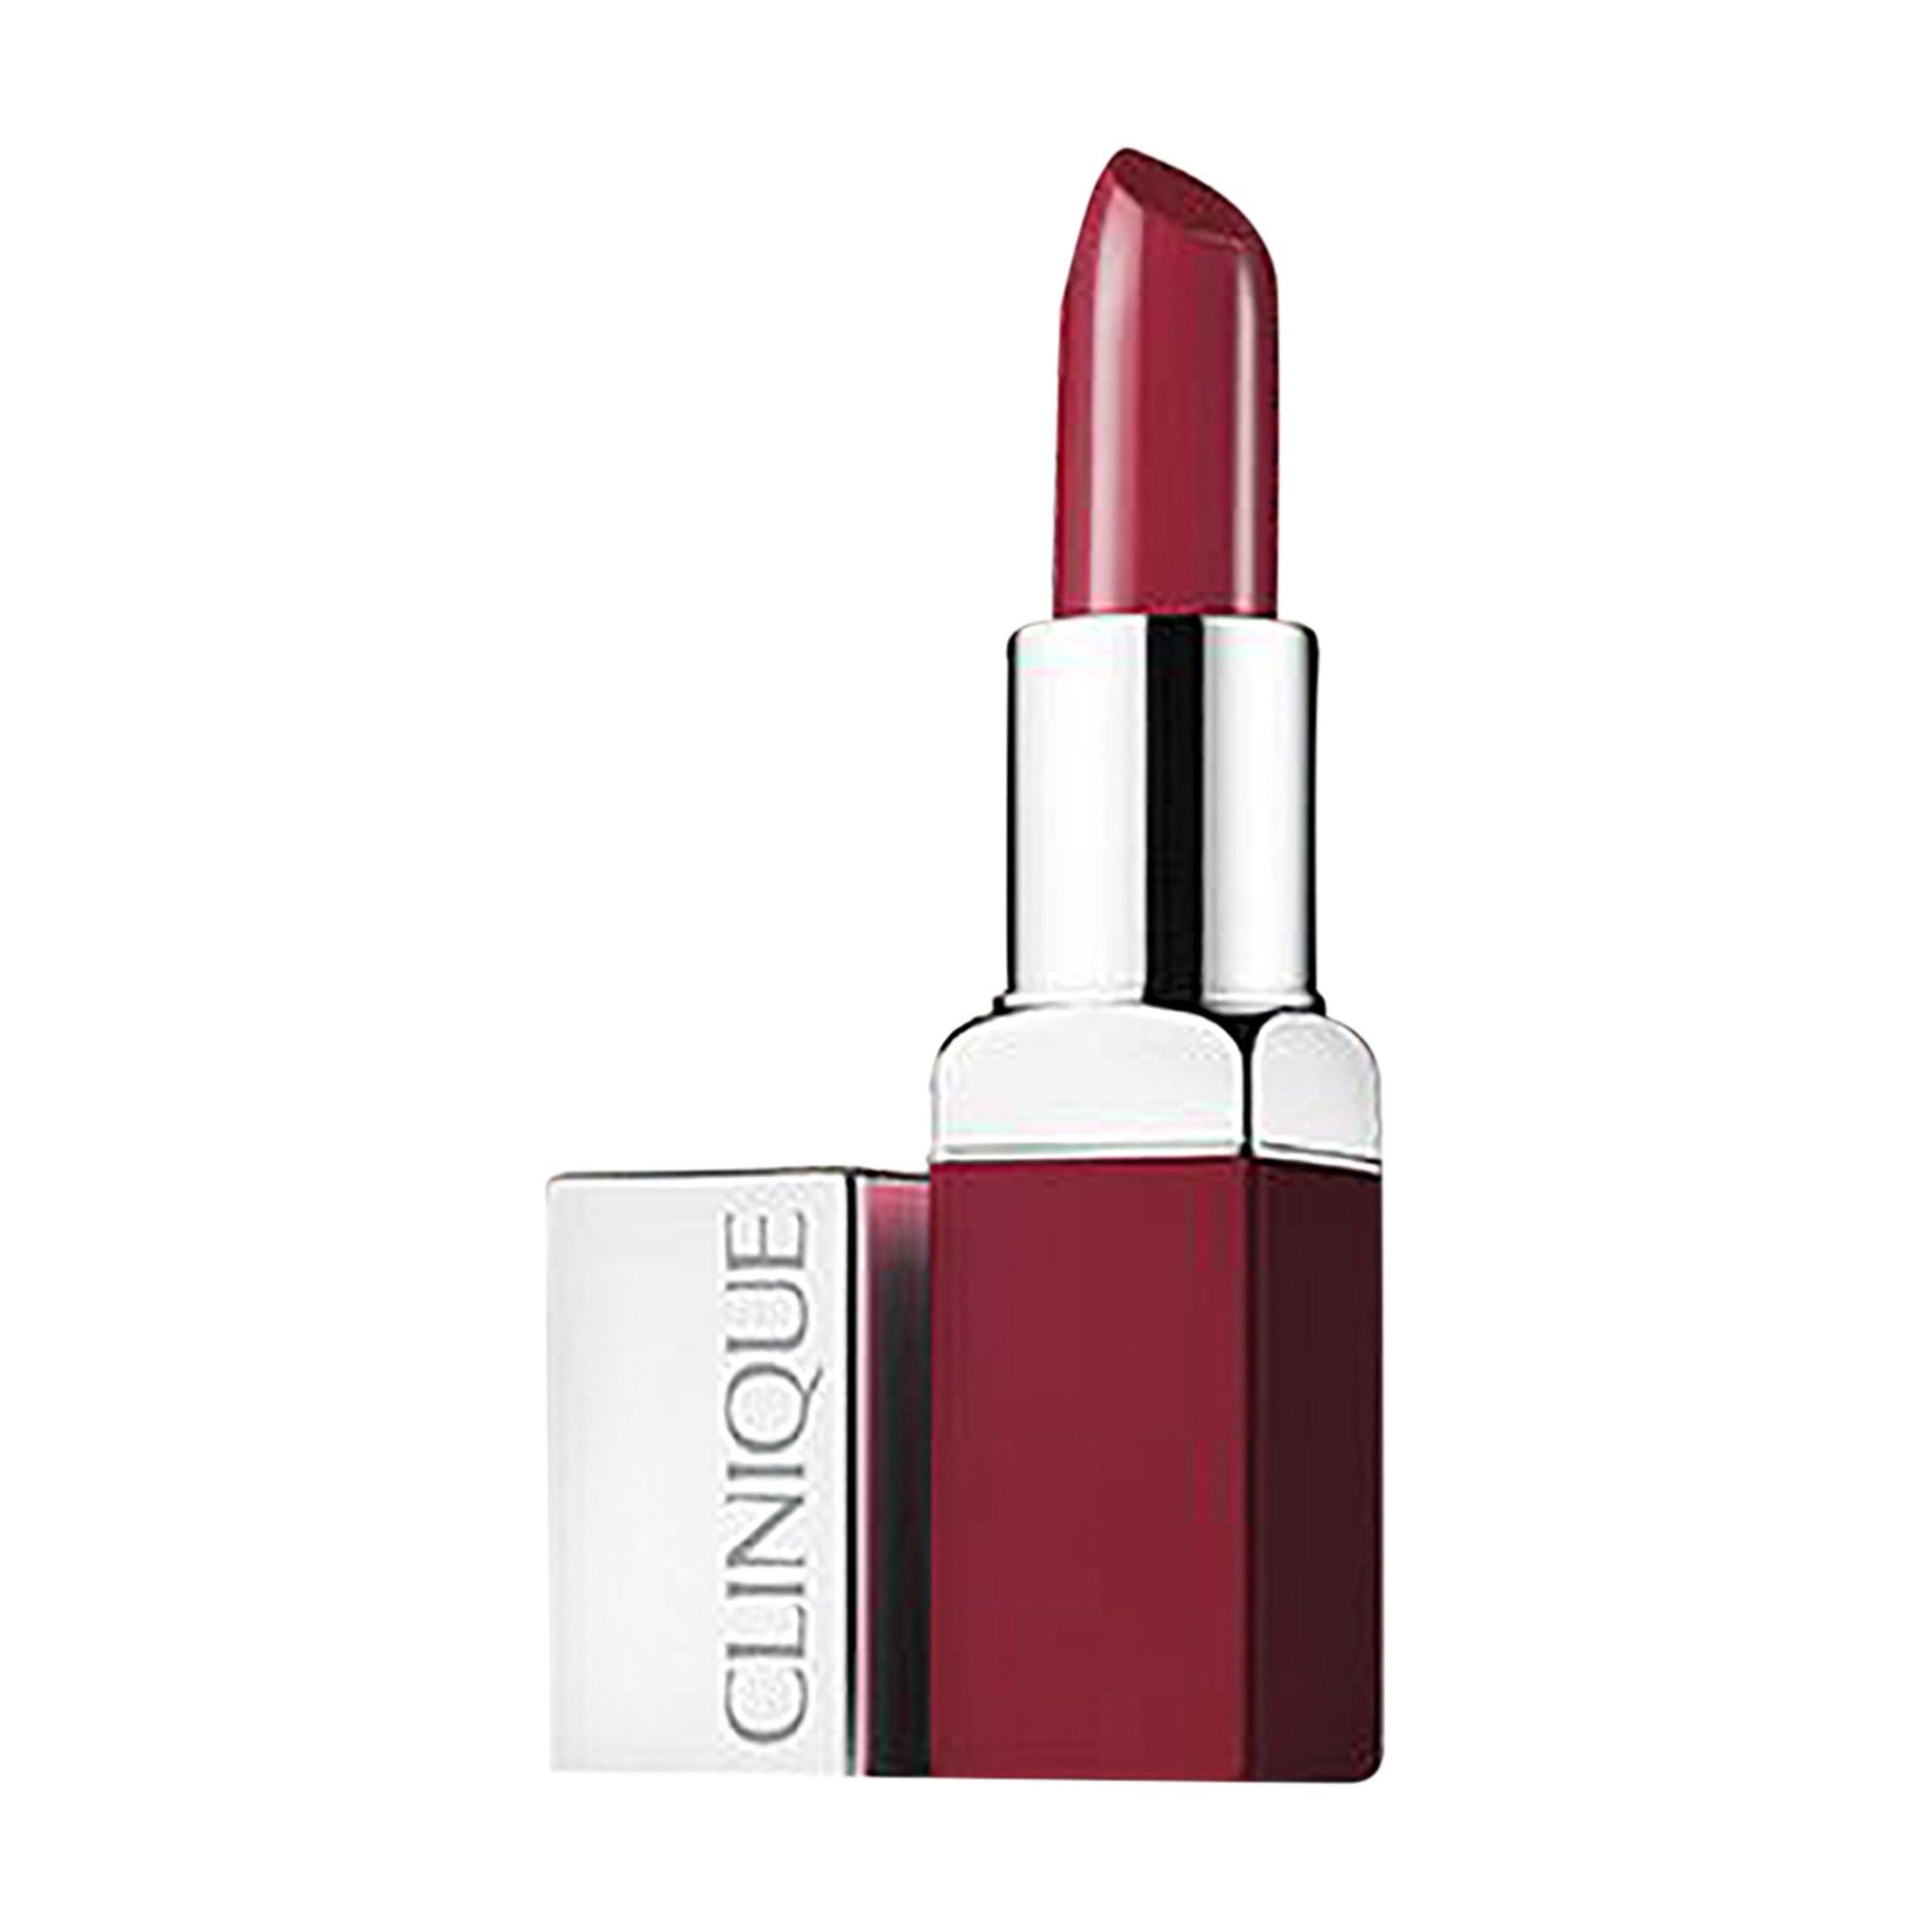 Clinique Pop Lip Colour and Primer Color/Shade variant: PASSION POP main image. This product is in the color nude